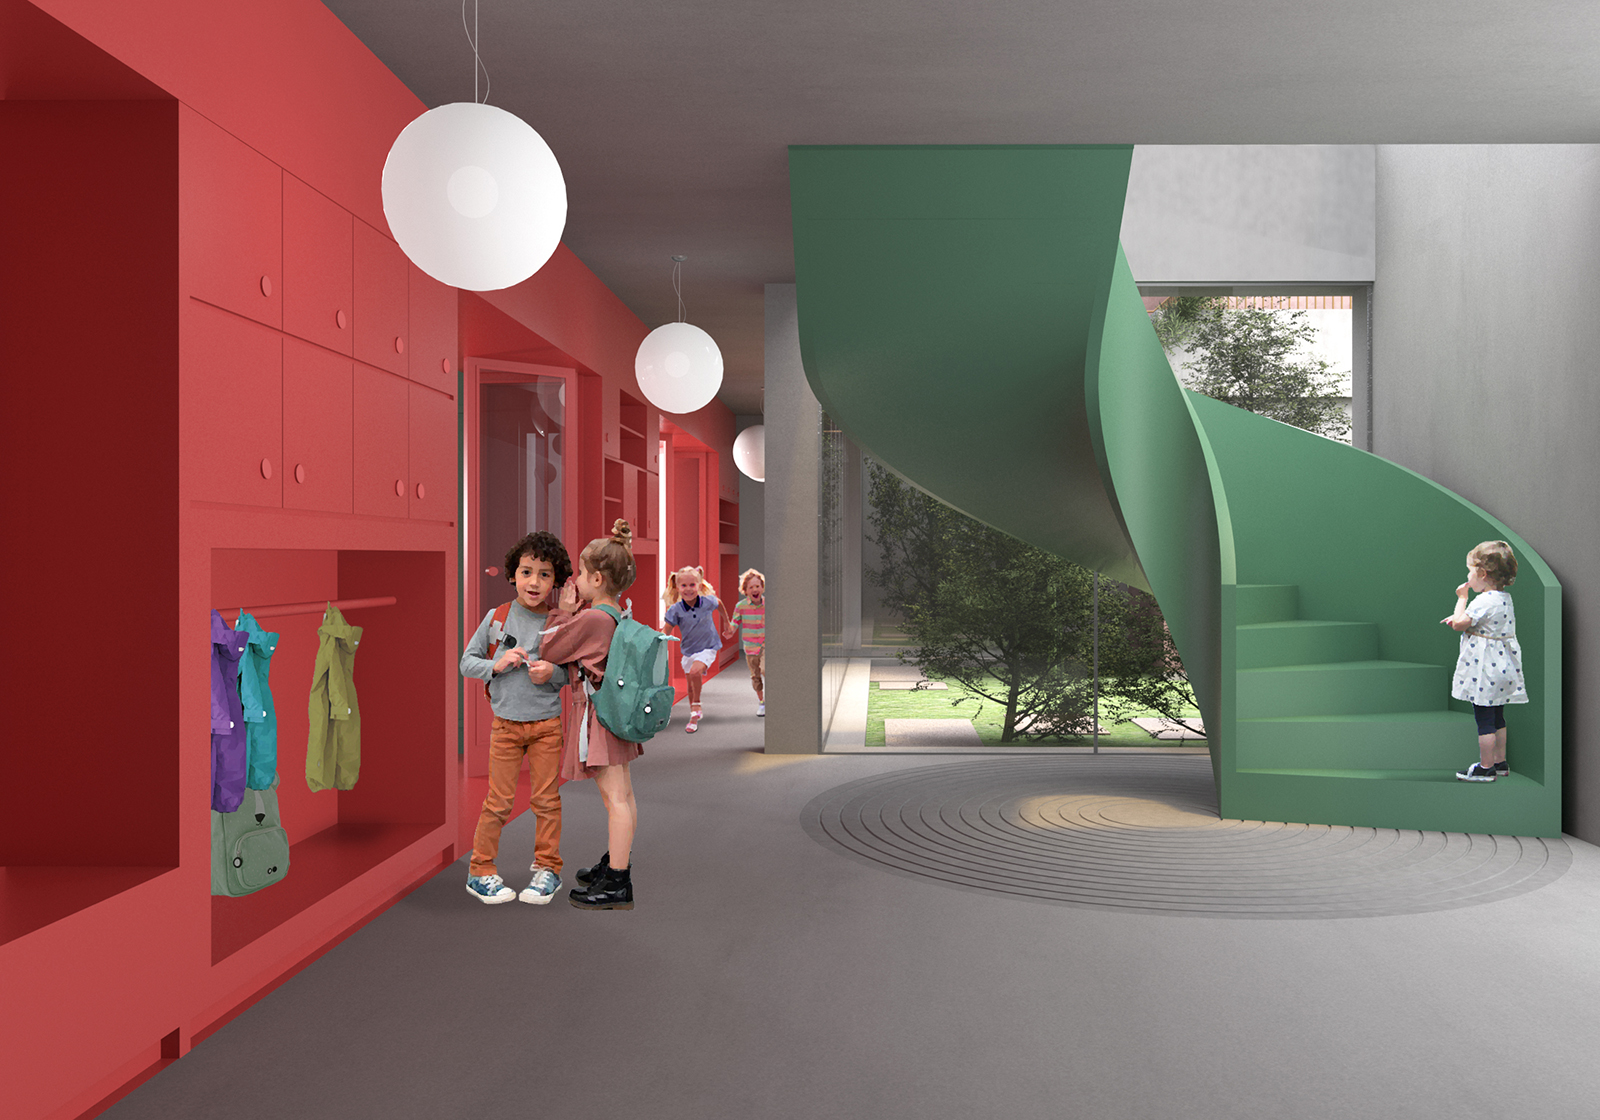 Archisearch Architectural competition entry about a kindergarten building in Attica, at area of Holargos – Papagou by MF Design team